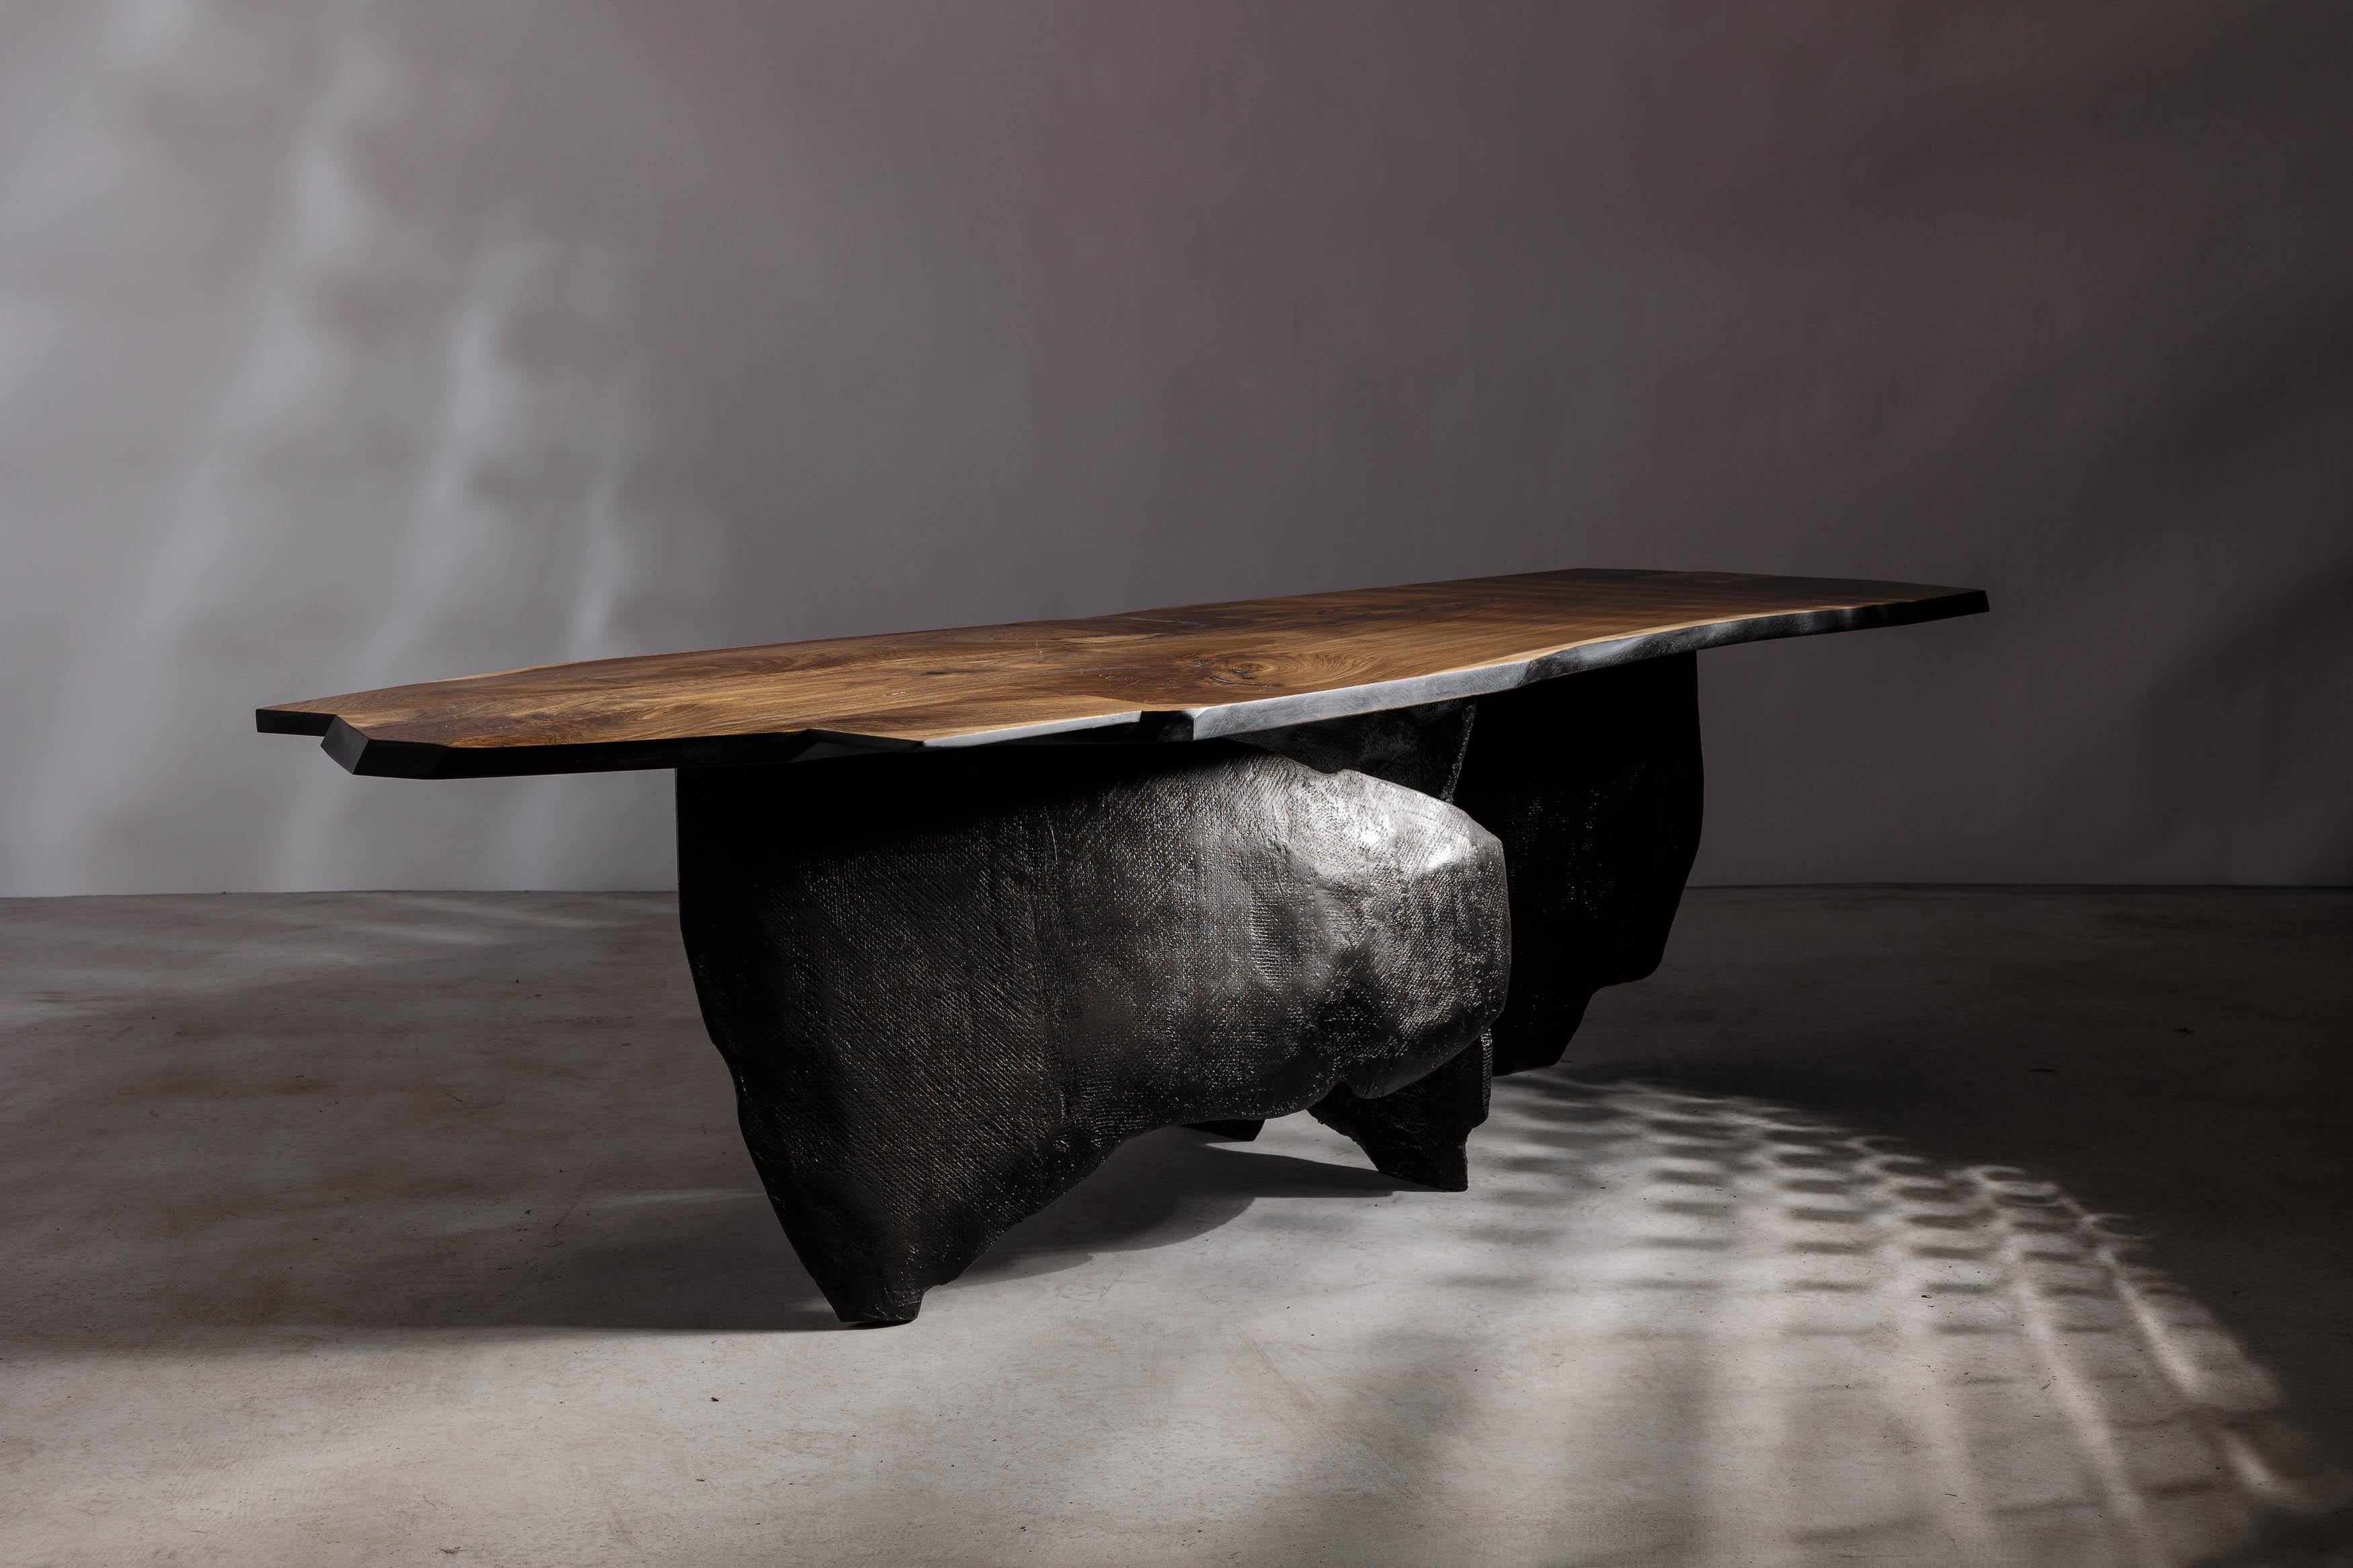 EM204 dining table by Eero Moss
One of a kind
Dimensions; W 303 x D 89 x H 78 cm
Materials: Walnut, ash, fiberglass, acrylic resin, India ink.
Finish: Natural oils.

18 Brut Collection

The latest collection by the artist is a tribute to the